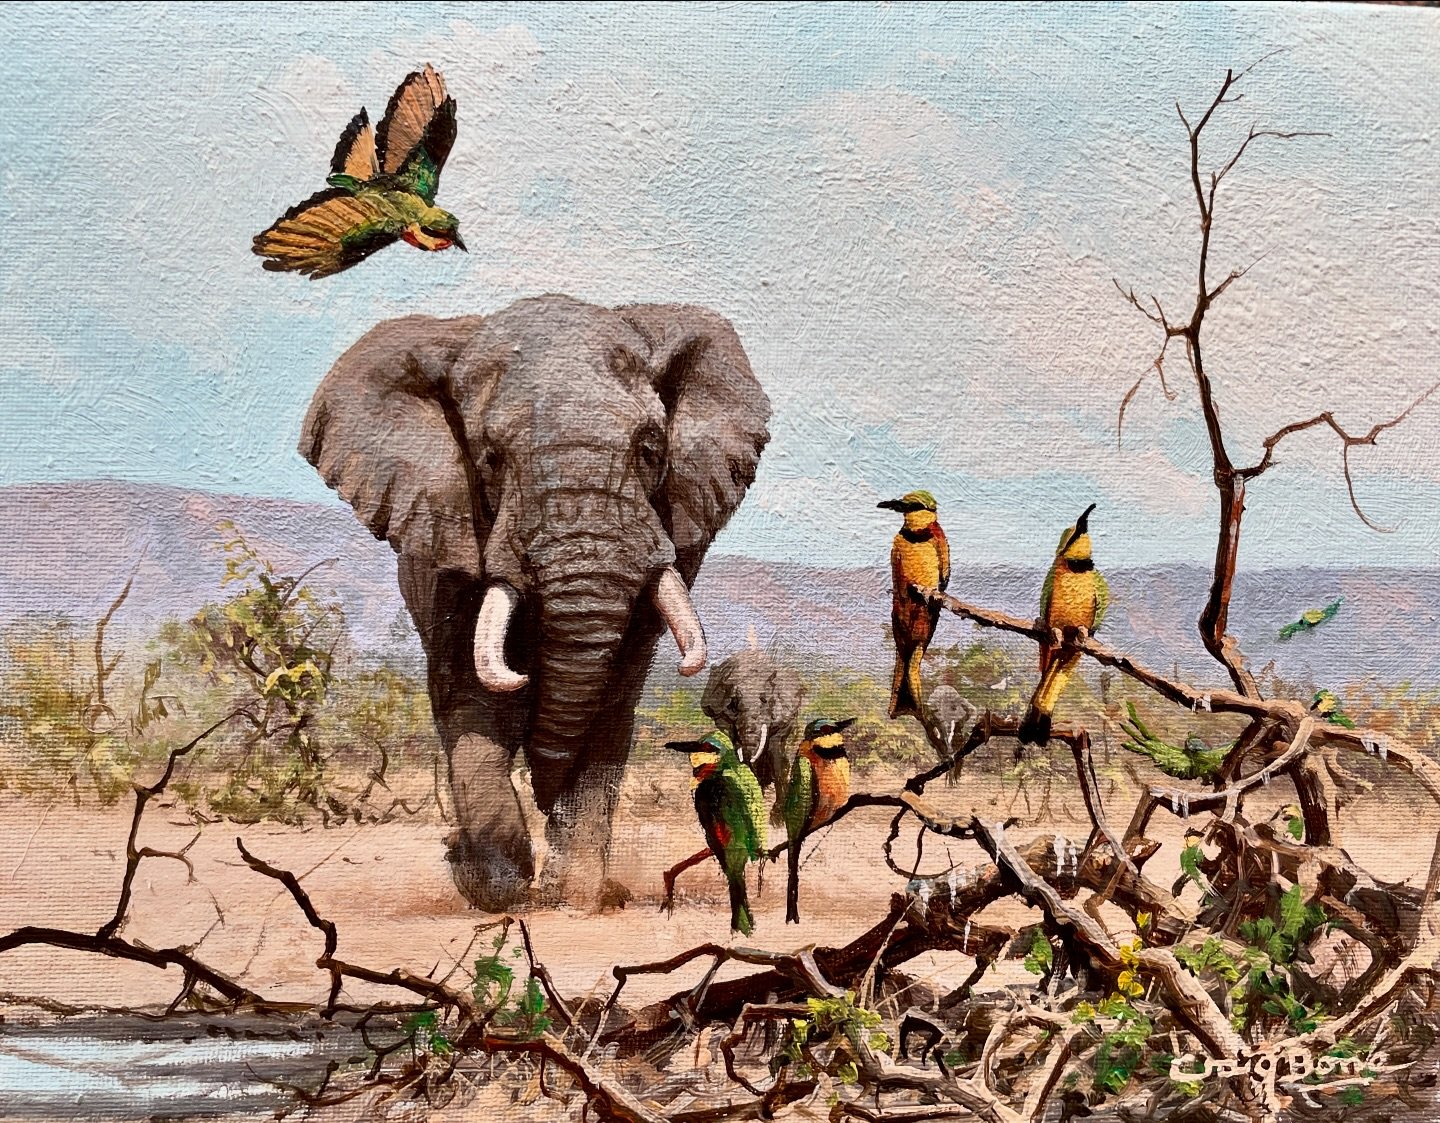 Elephant Bull with little Bee-Eaters in the foreground.  #Africa #craigboneartist #birds #elephant